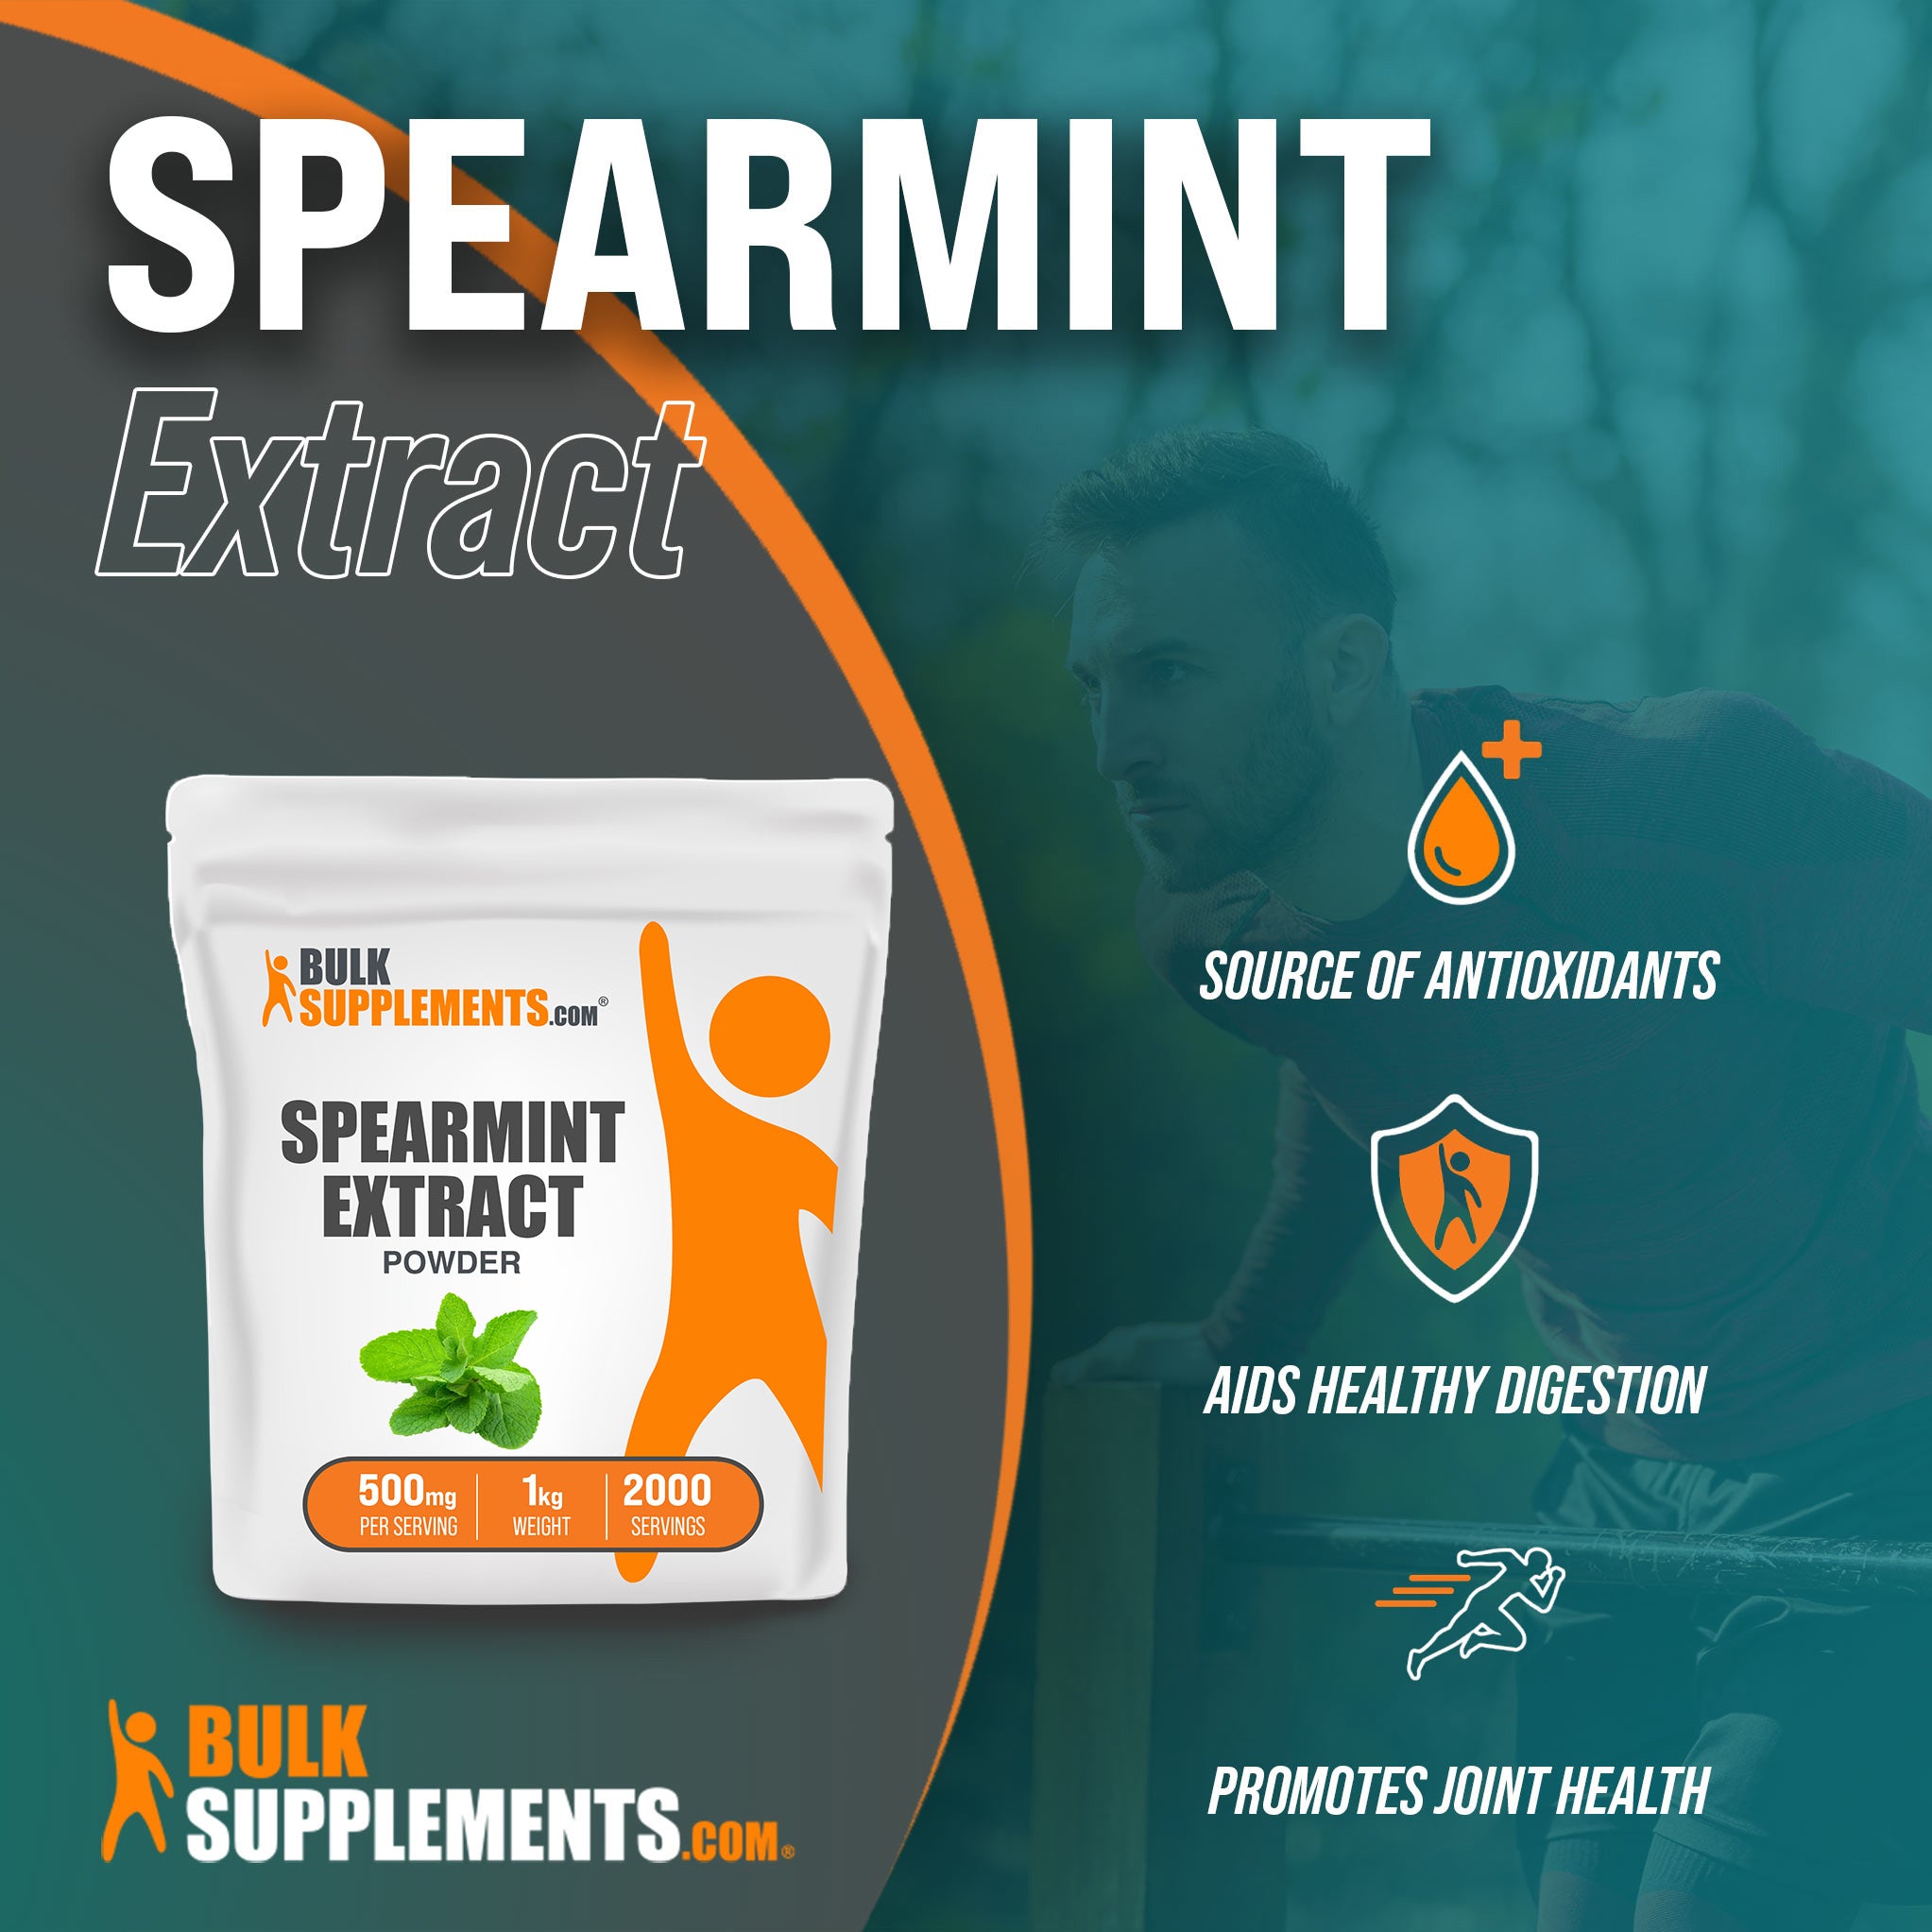 Benefits of Spearmint Extract: source of antioxidants, aids healthy digestion, promotes joint health